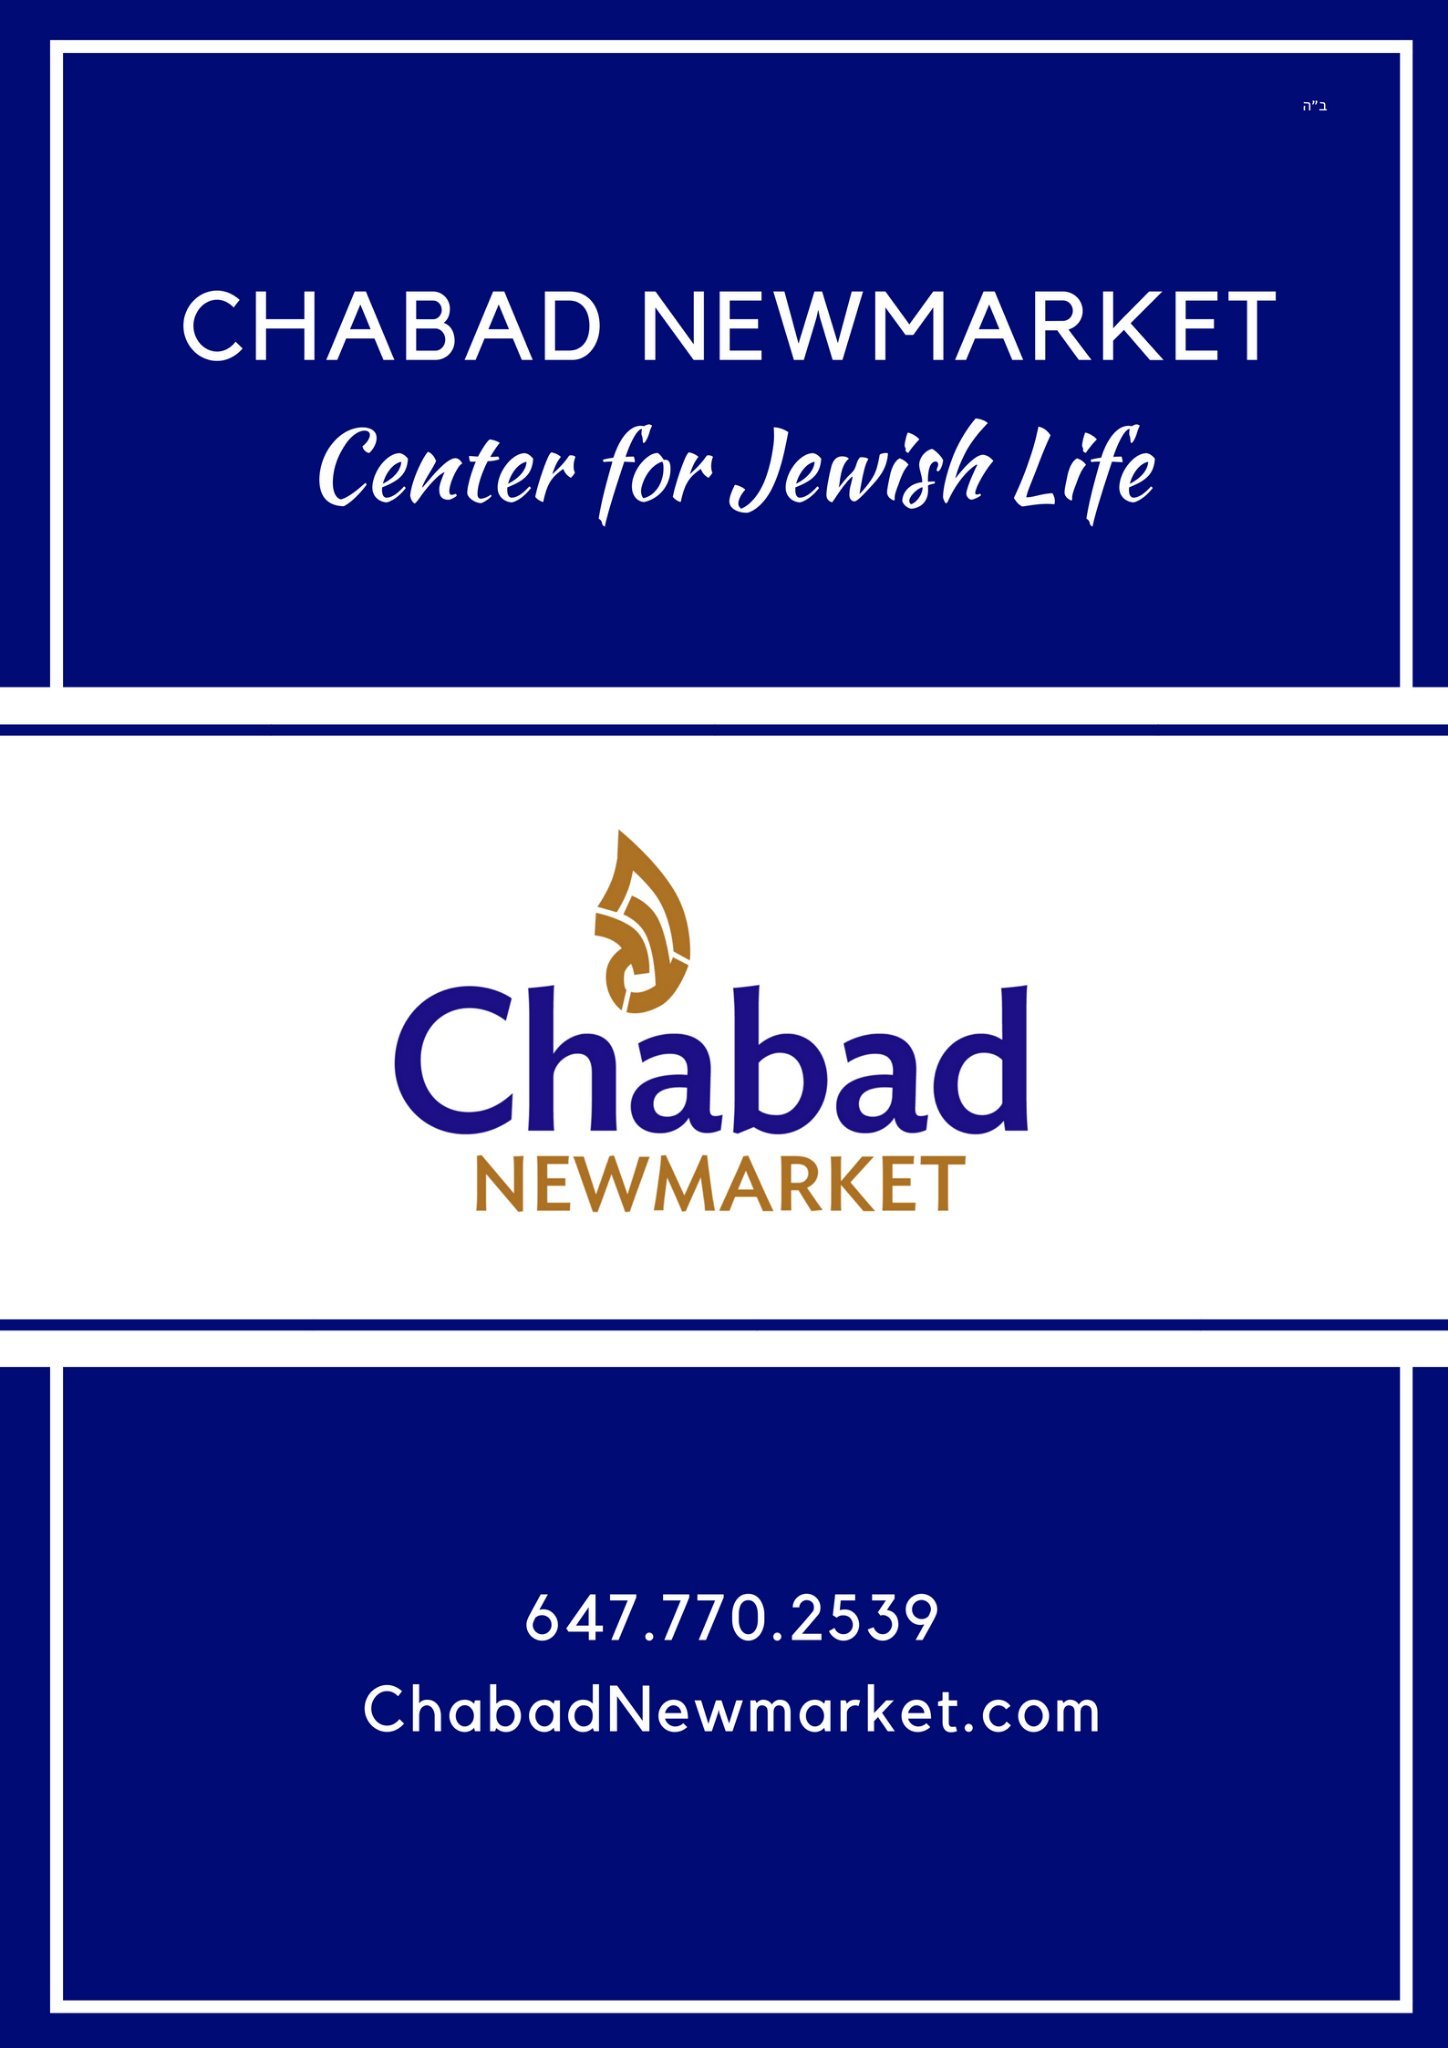 Chabad Newmarket- Centre for Jewish Life. Bringing the Light of Torah and the Warmth of Mitzvot.